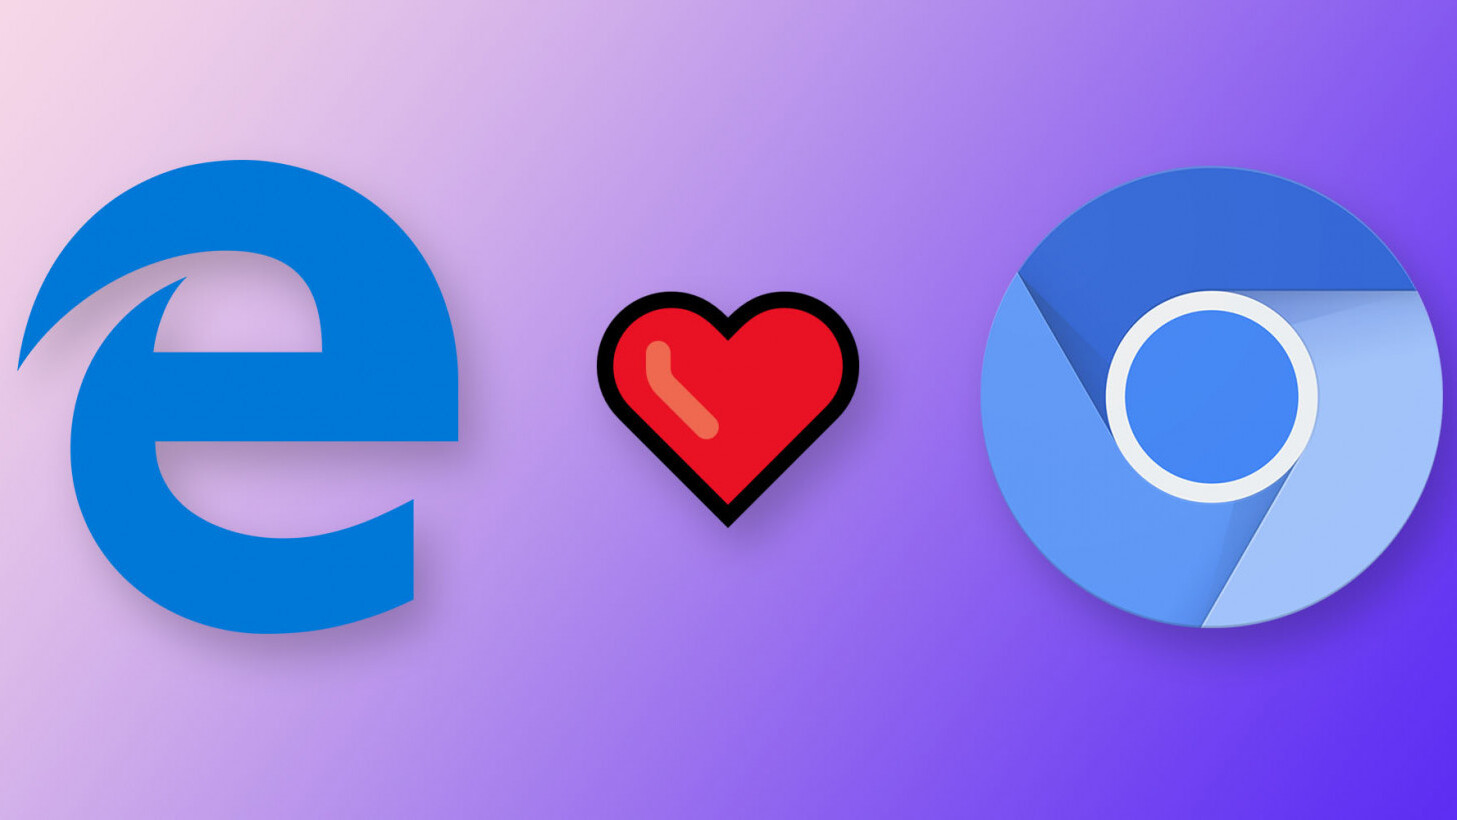 Microsoft Edge is officially switching to Chromium in 2019 – here’s why that’s a good thing